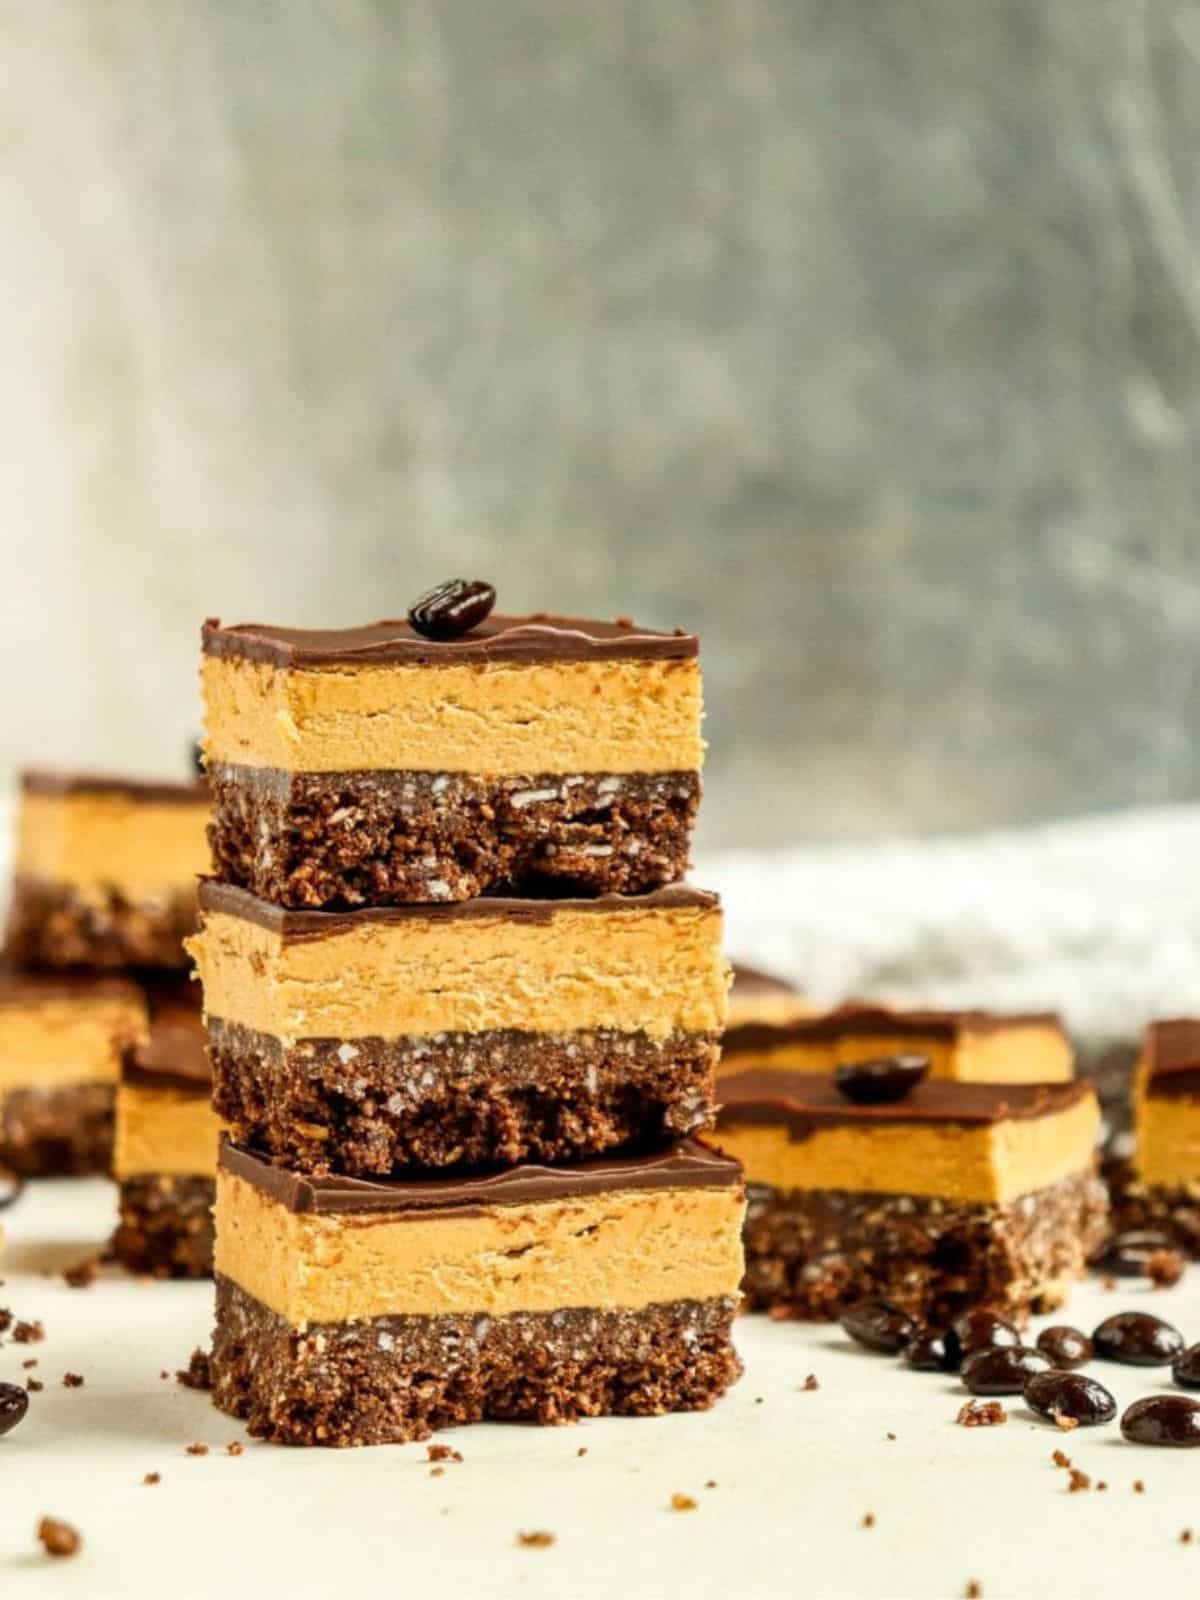 Canadian coffee nanaimo bar treats featuring a silky chocolate top and the coconut graham cracker crust with coffee-flavored custard icing.